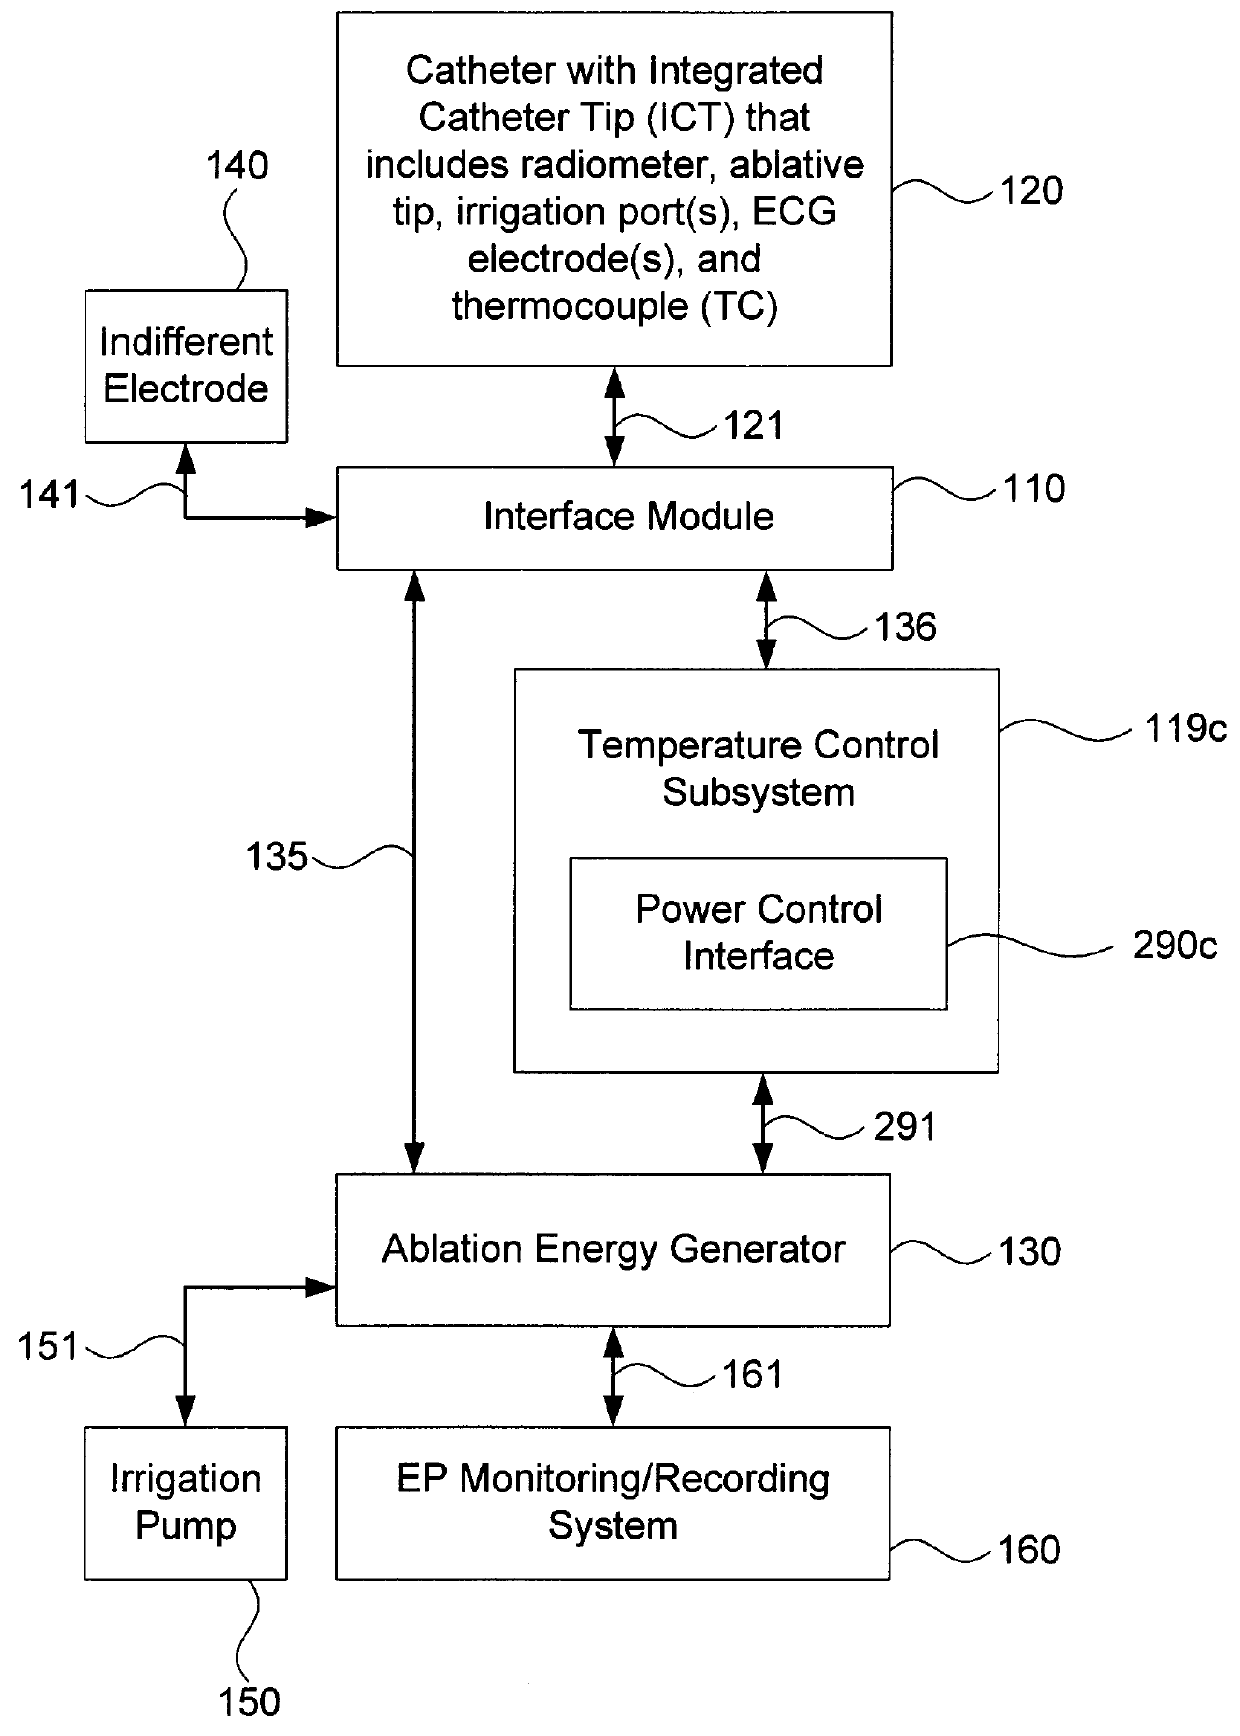 Systems for temperature-controlled ablation using radiometric feedback